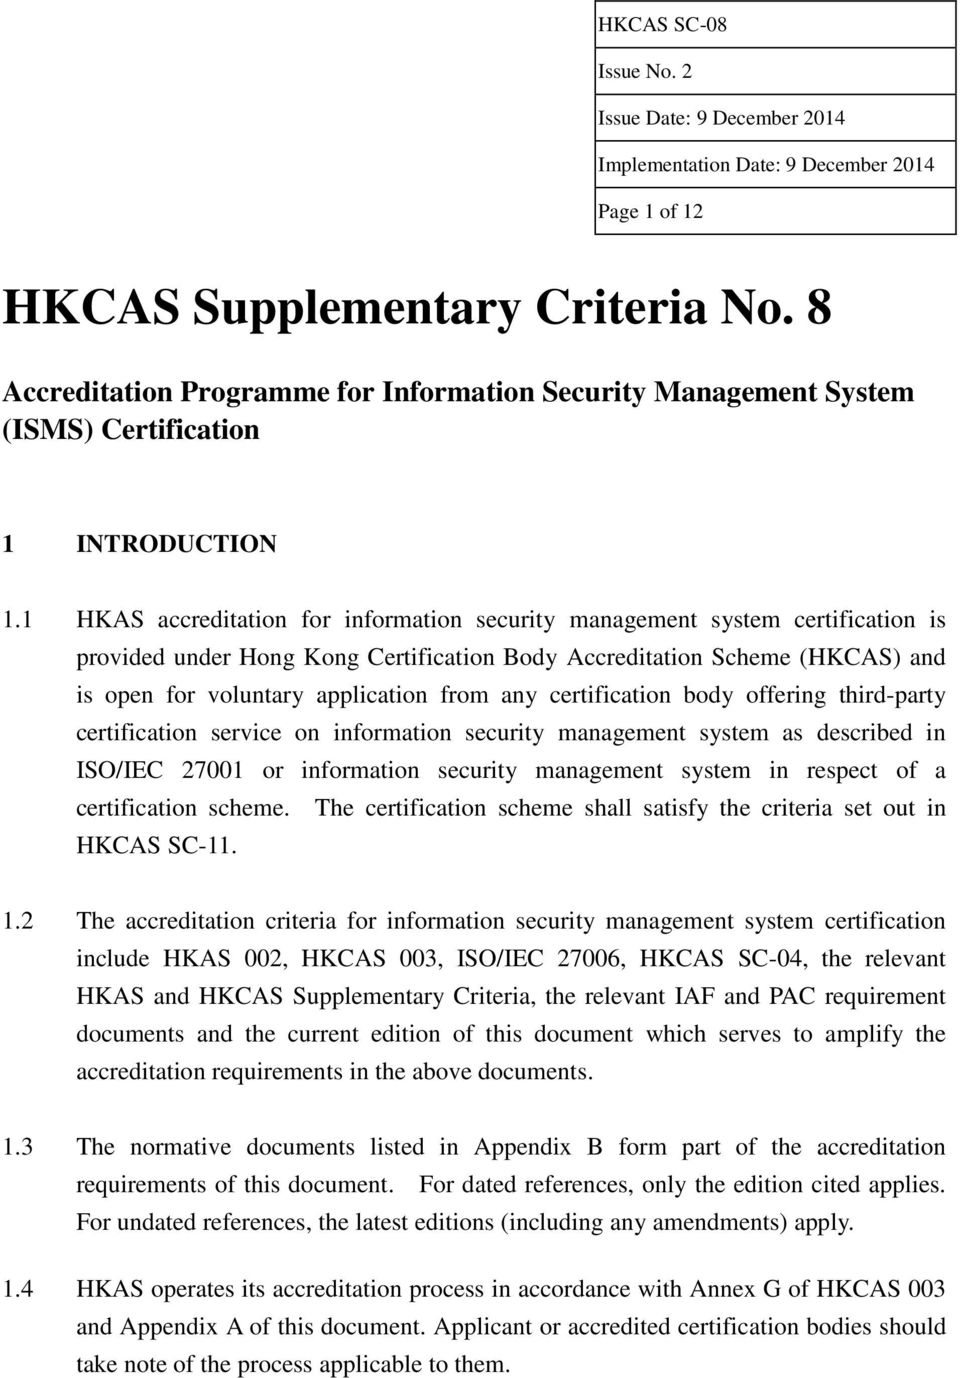 any certification body offering third-party certification service on information security management system as described in ISO/IEC 27001 or information security management system in respect of a